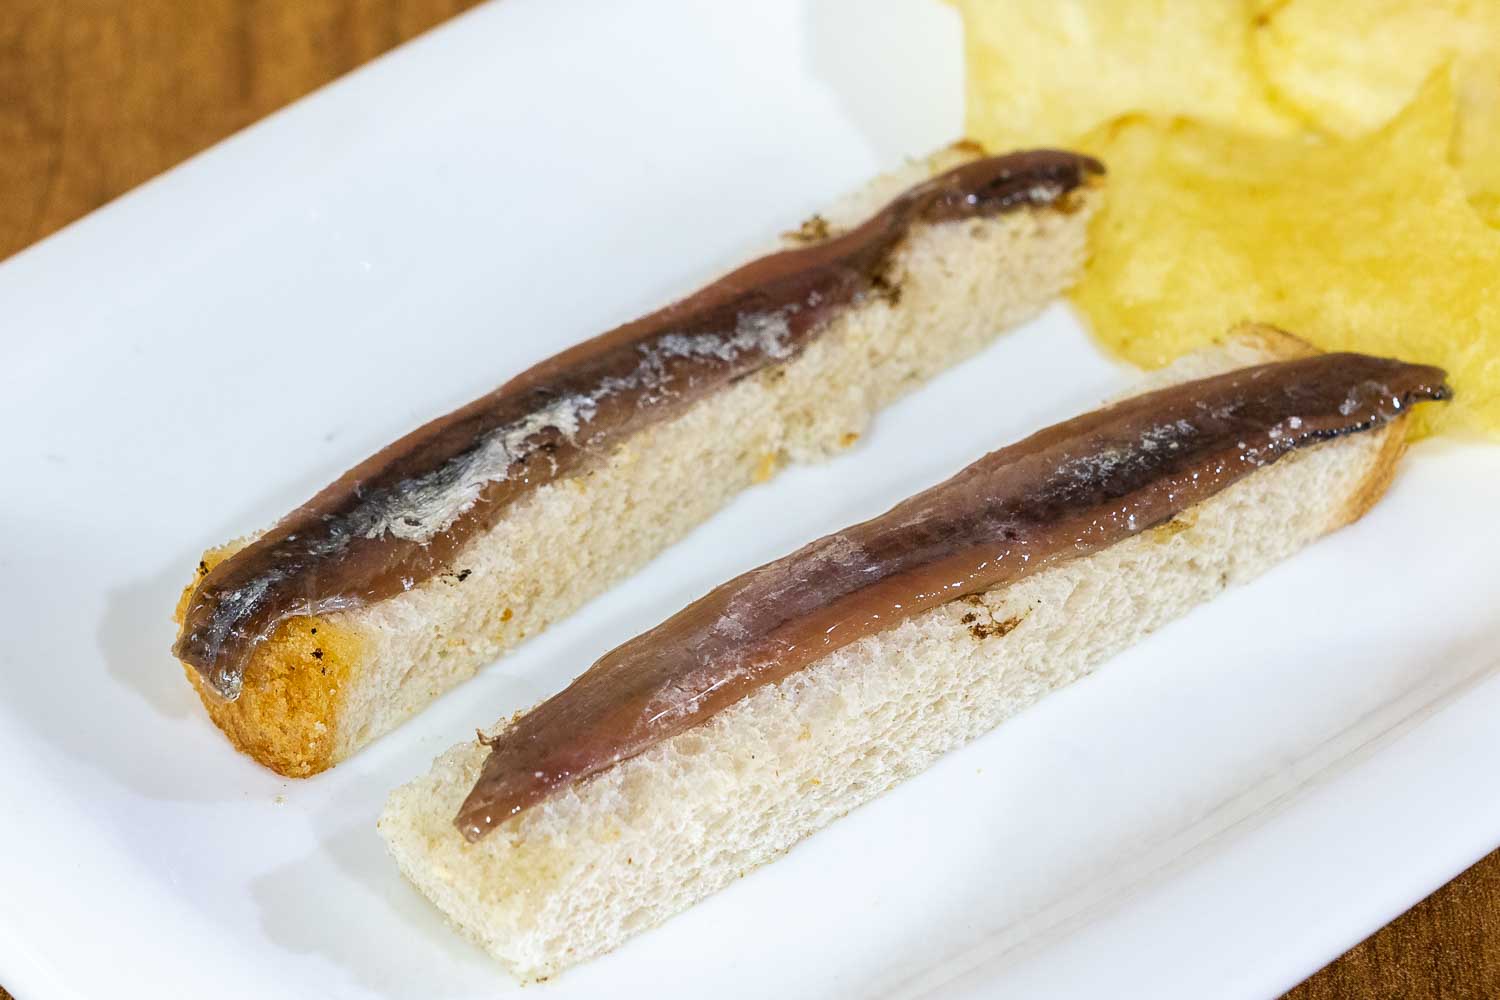 Strips of bread with cantabrian anchovies